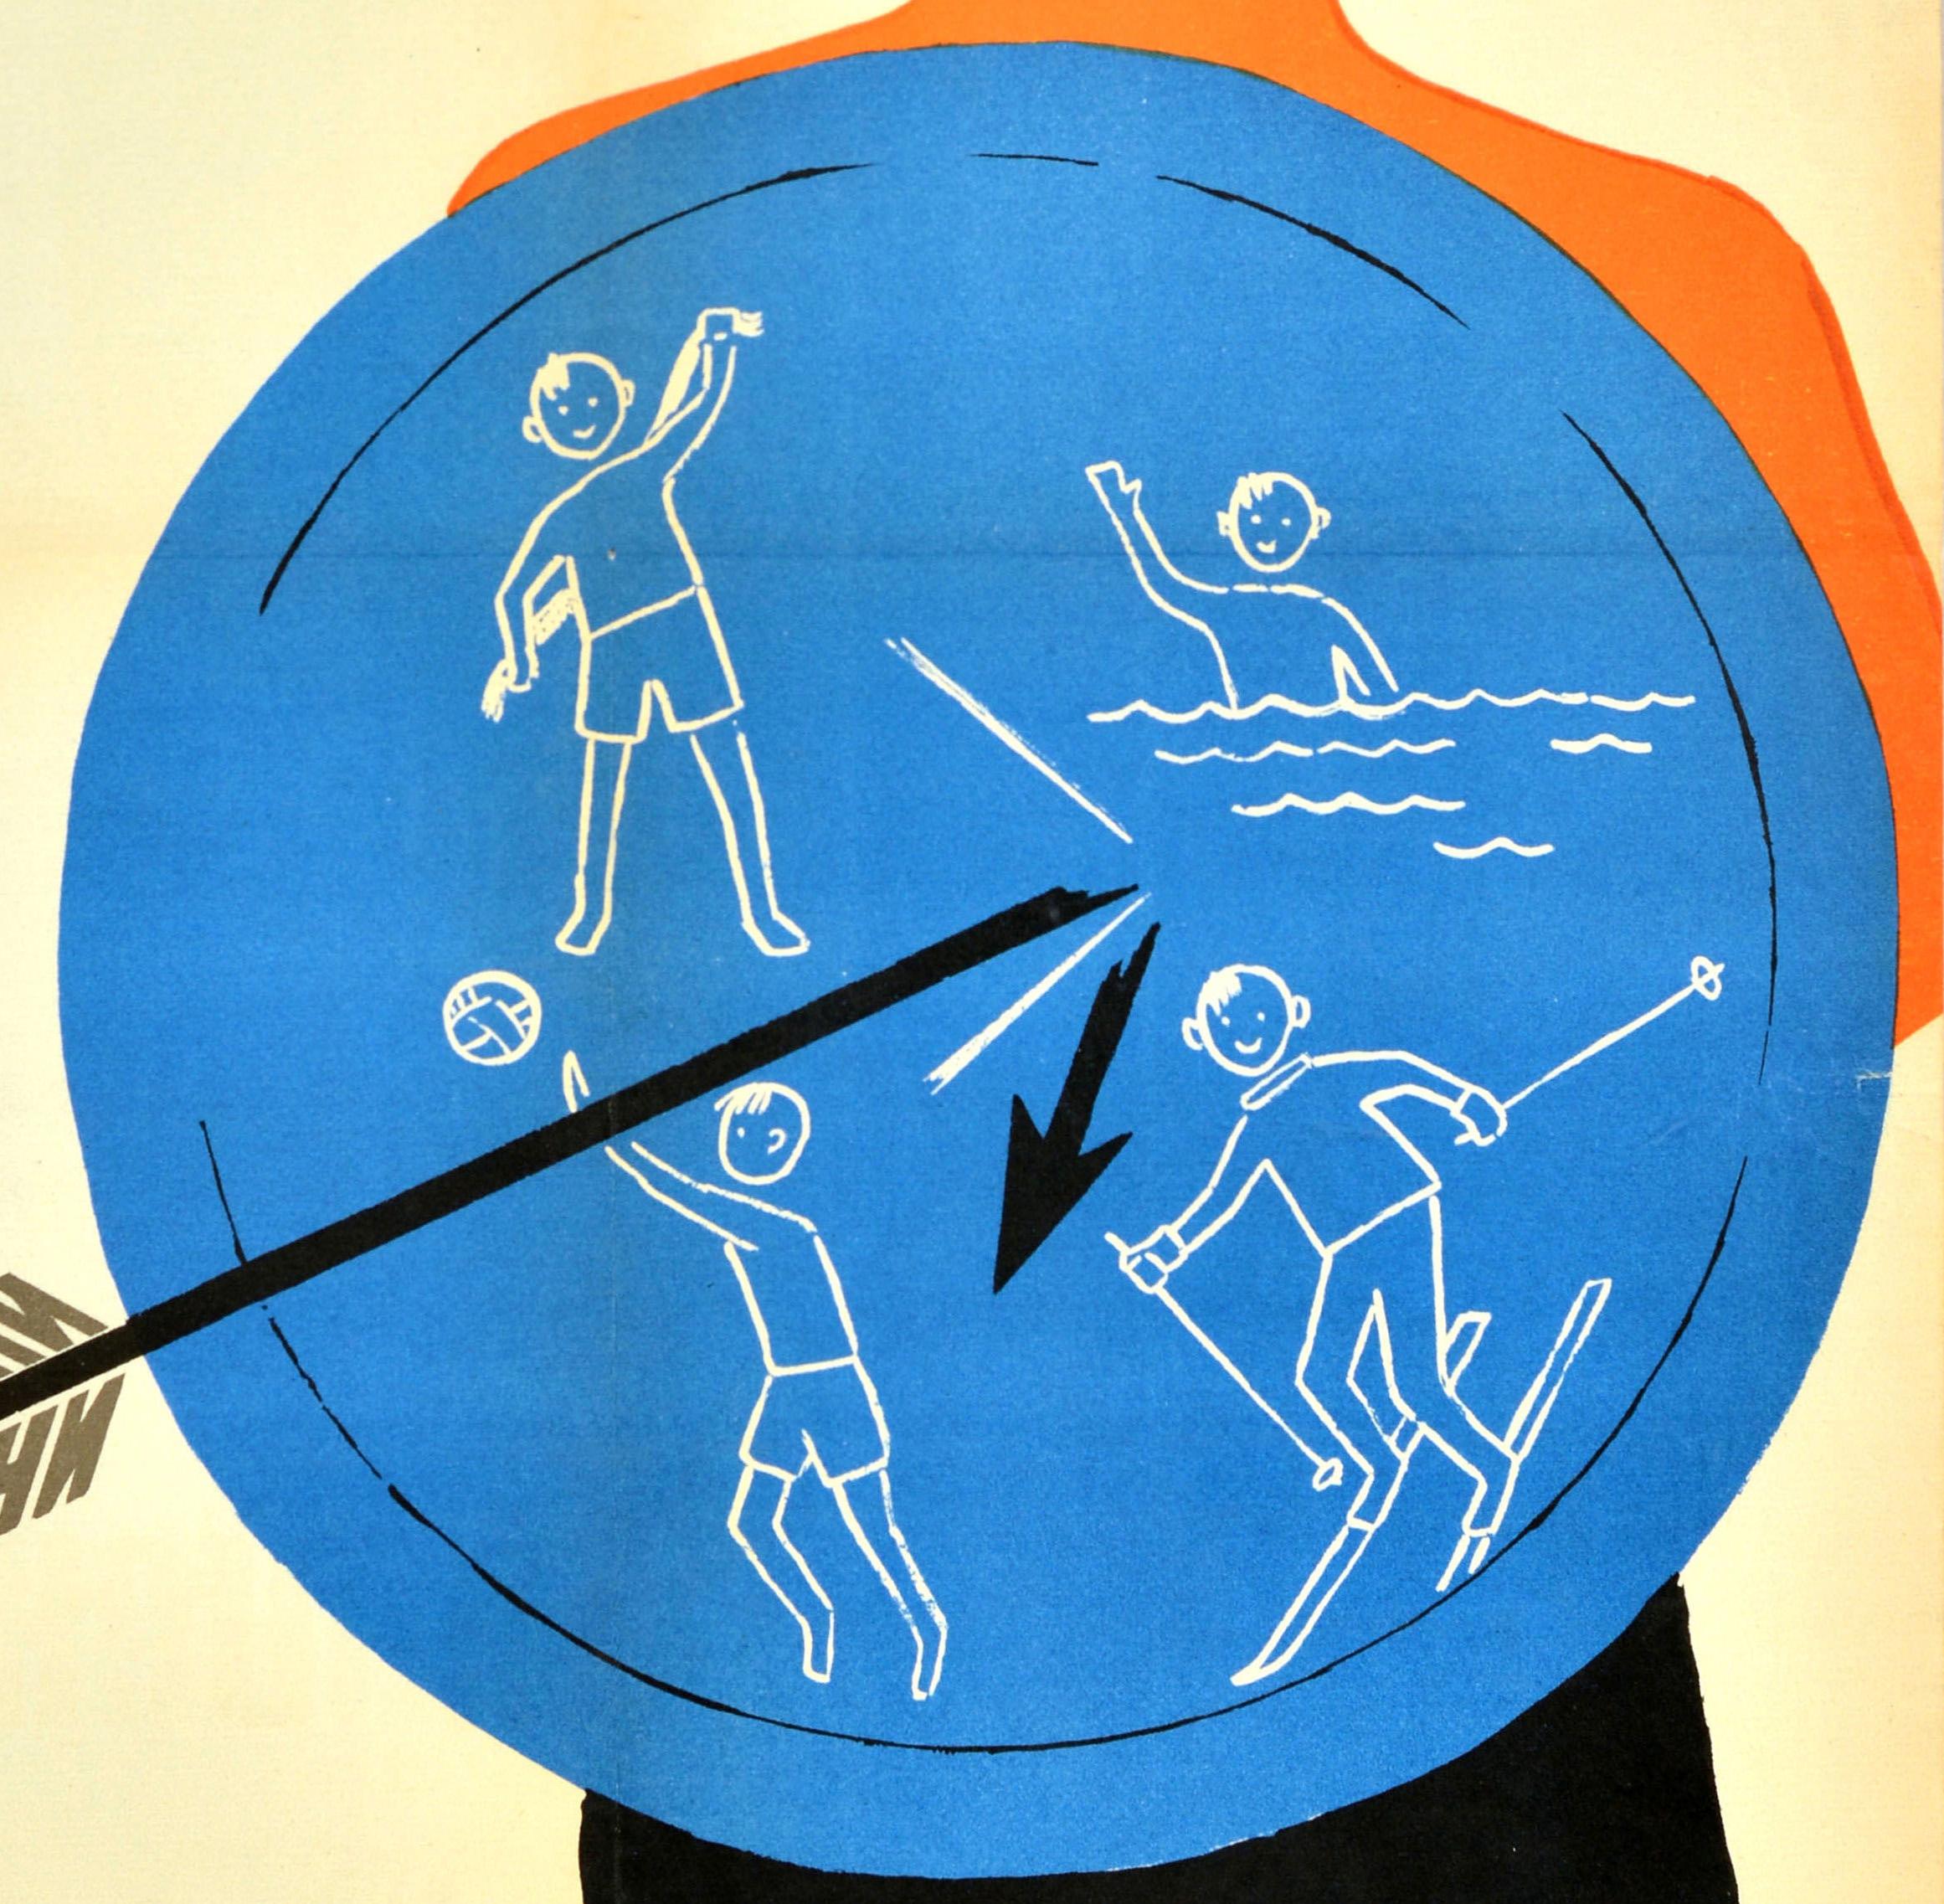 Original vintage health propaganda poster - I am cold trained - featuring an illustration of a smiling young boy holding up a shield with sport illustrations of swimming and playing a ball game, skiing and drying himself on it with a broken arrow